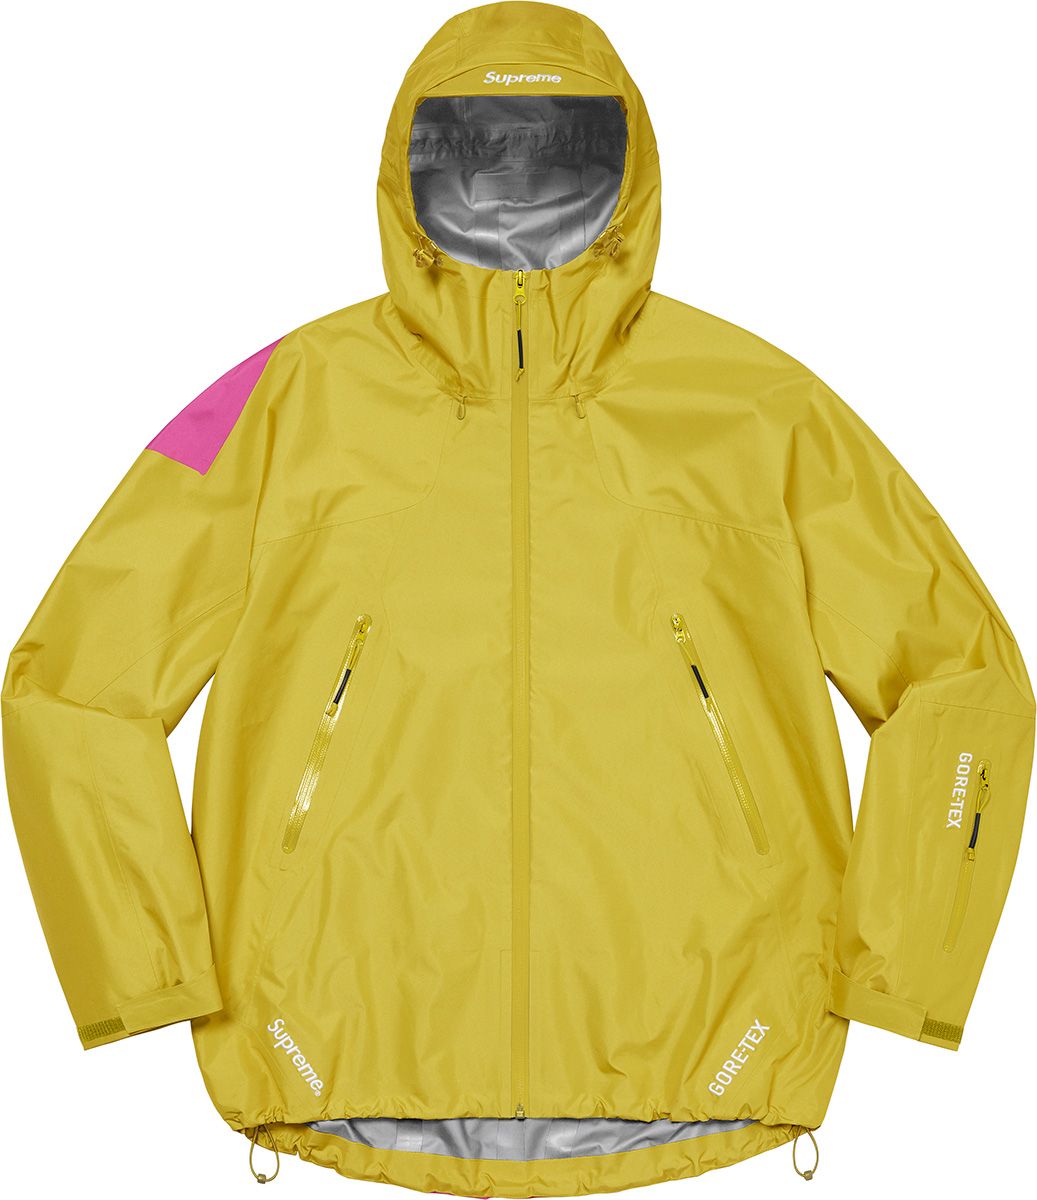 Gonz GORE-TEX Shell Jacket - Fall/Winter 2022 Preview – Supreme